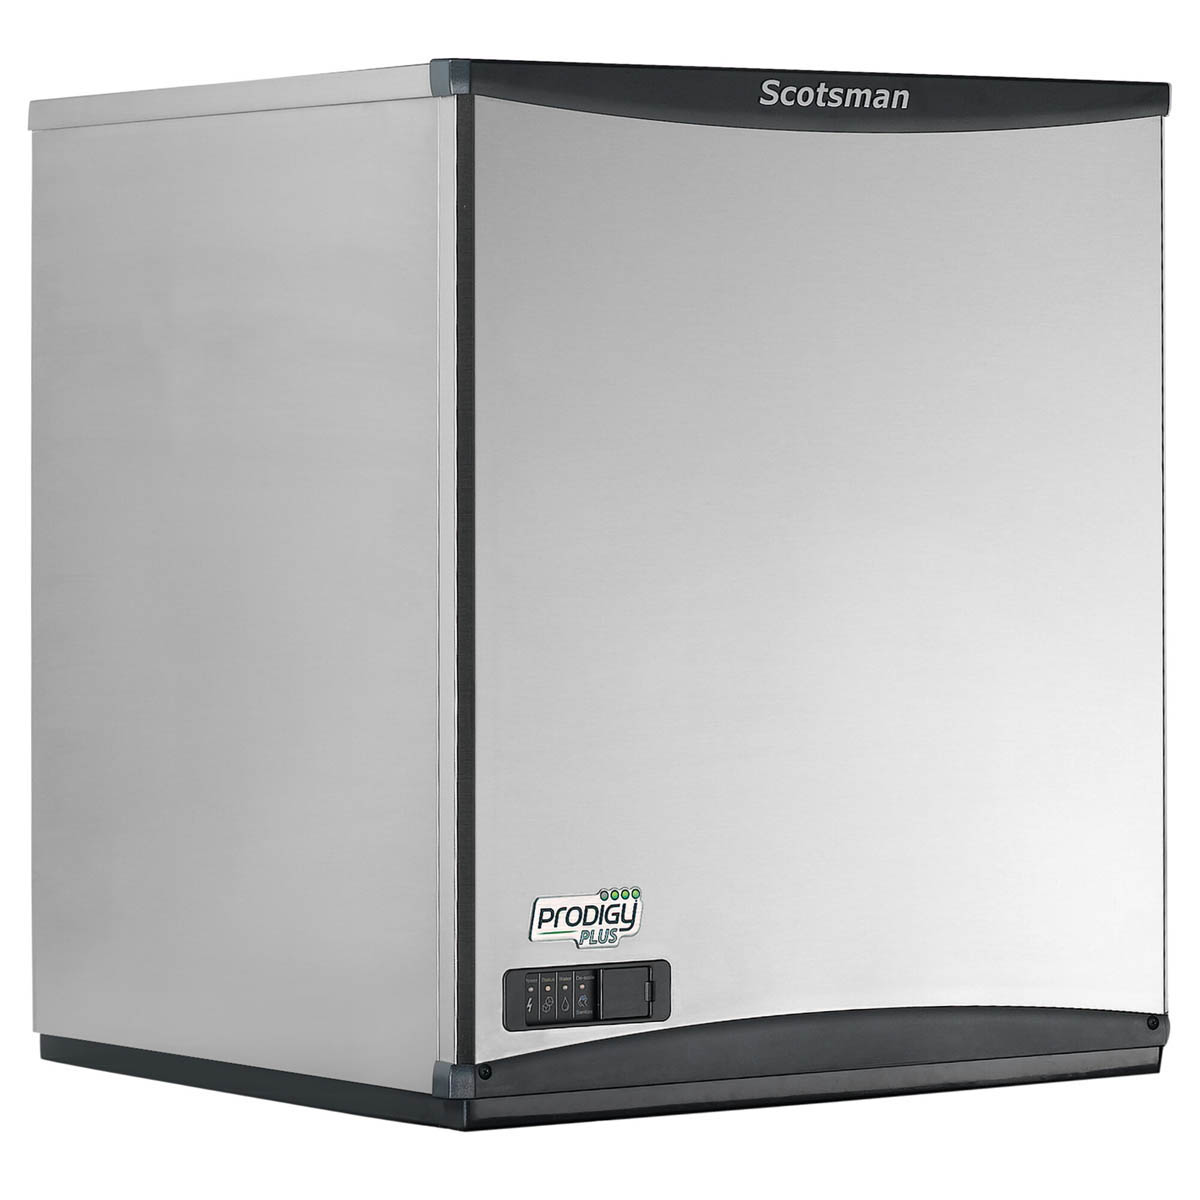 Scotsman NS0922W-3 Prodigy Plus Nugget Chewable Ice Machine, Chef's Deal